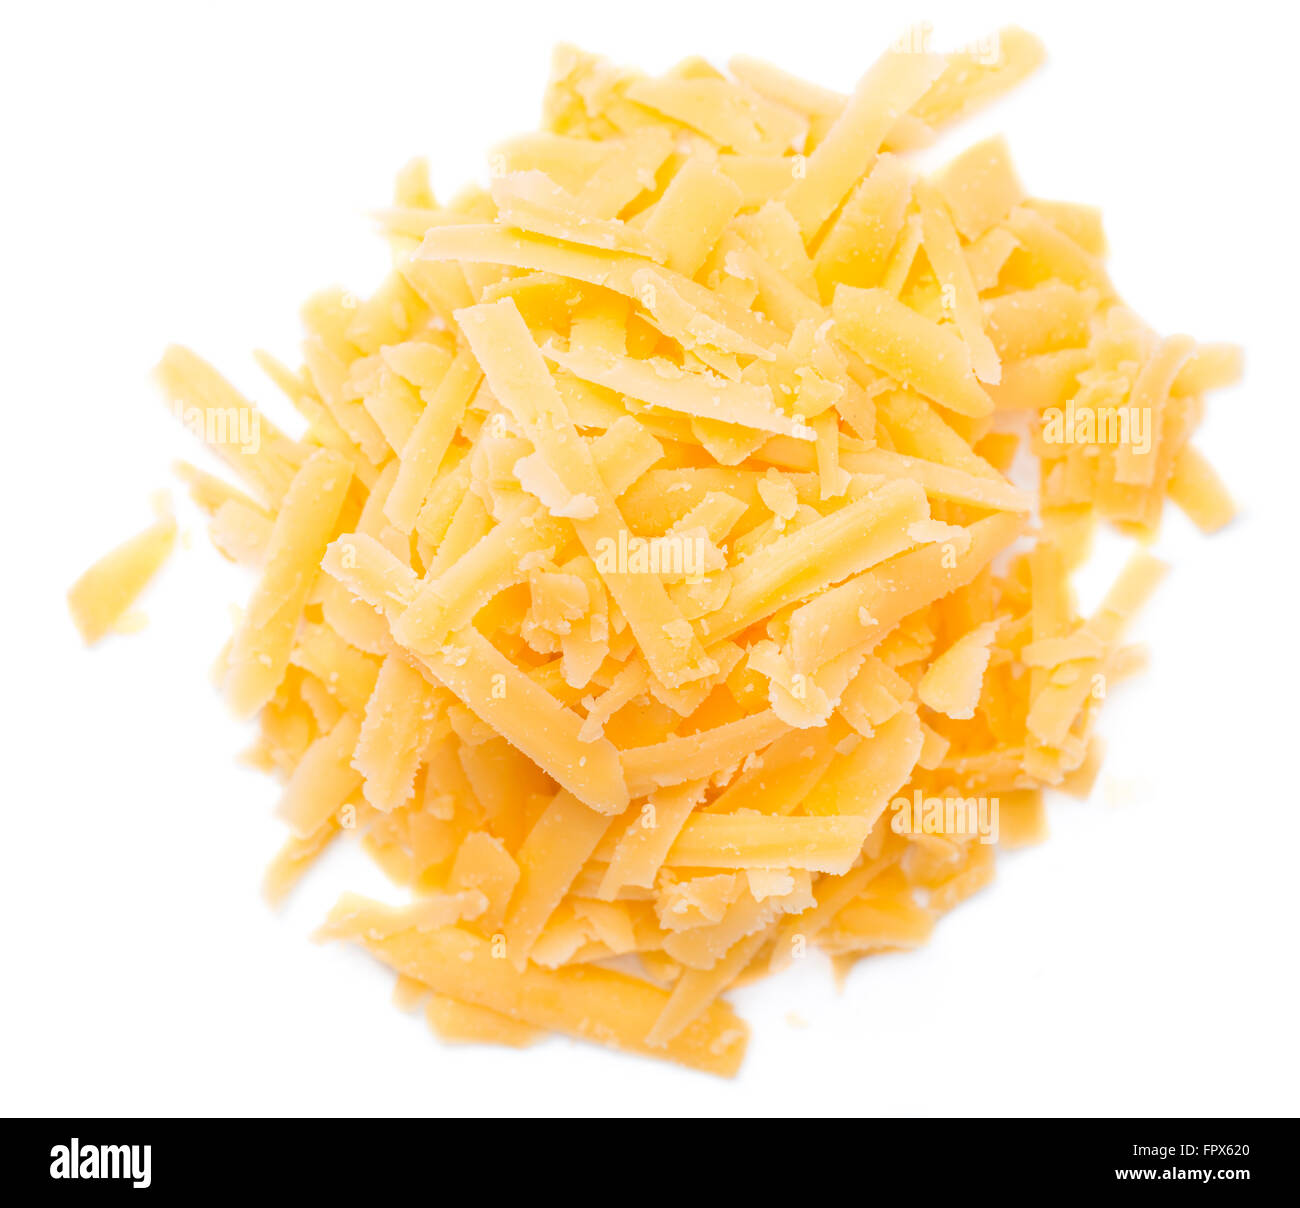 https://c8.alamy.com/comp/FPX620/grated-cheddar-cheese-isolated-on-pure-white-background-FPX620.jpg